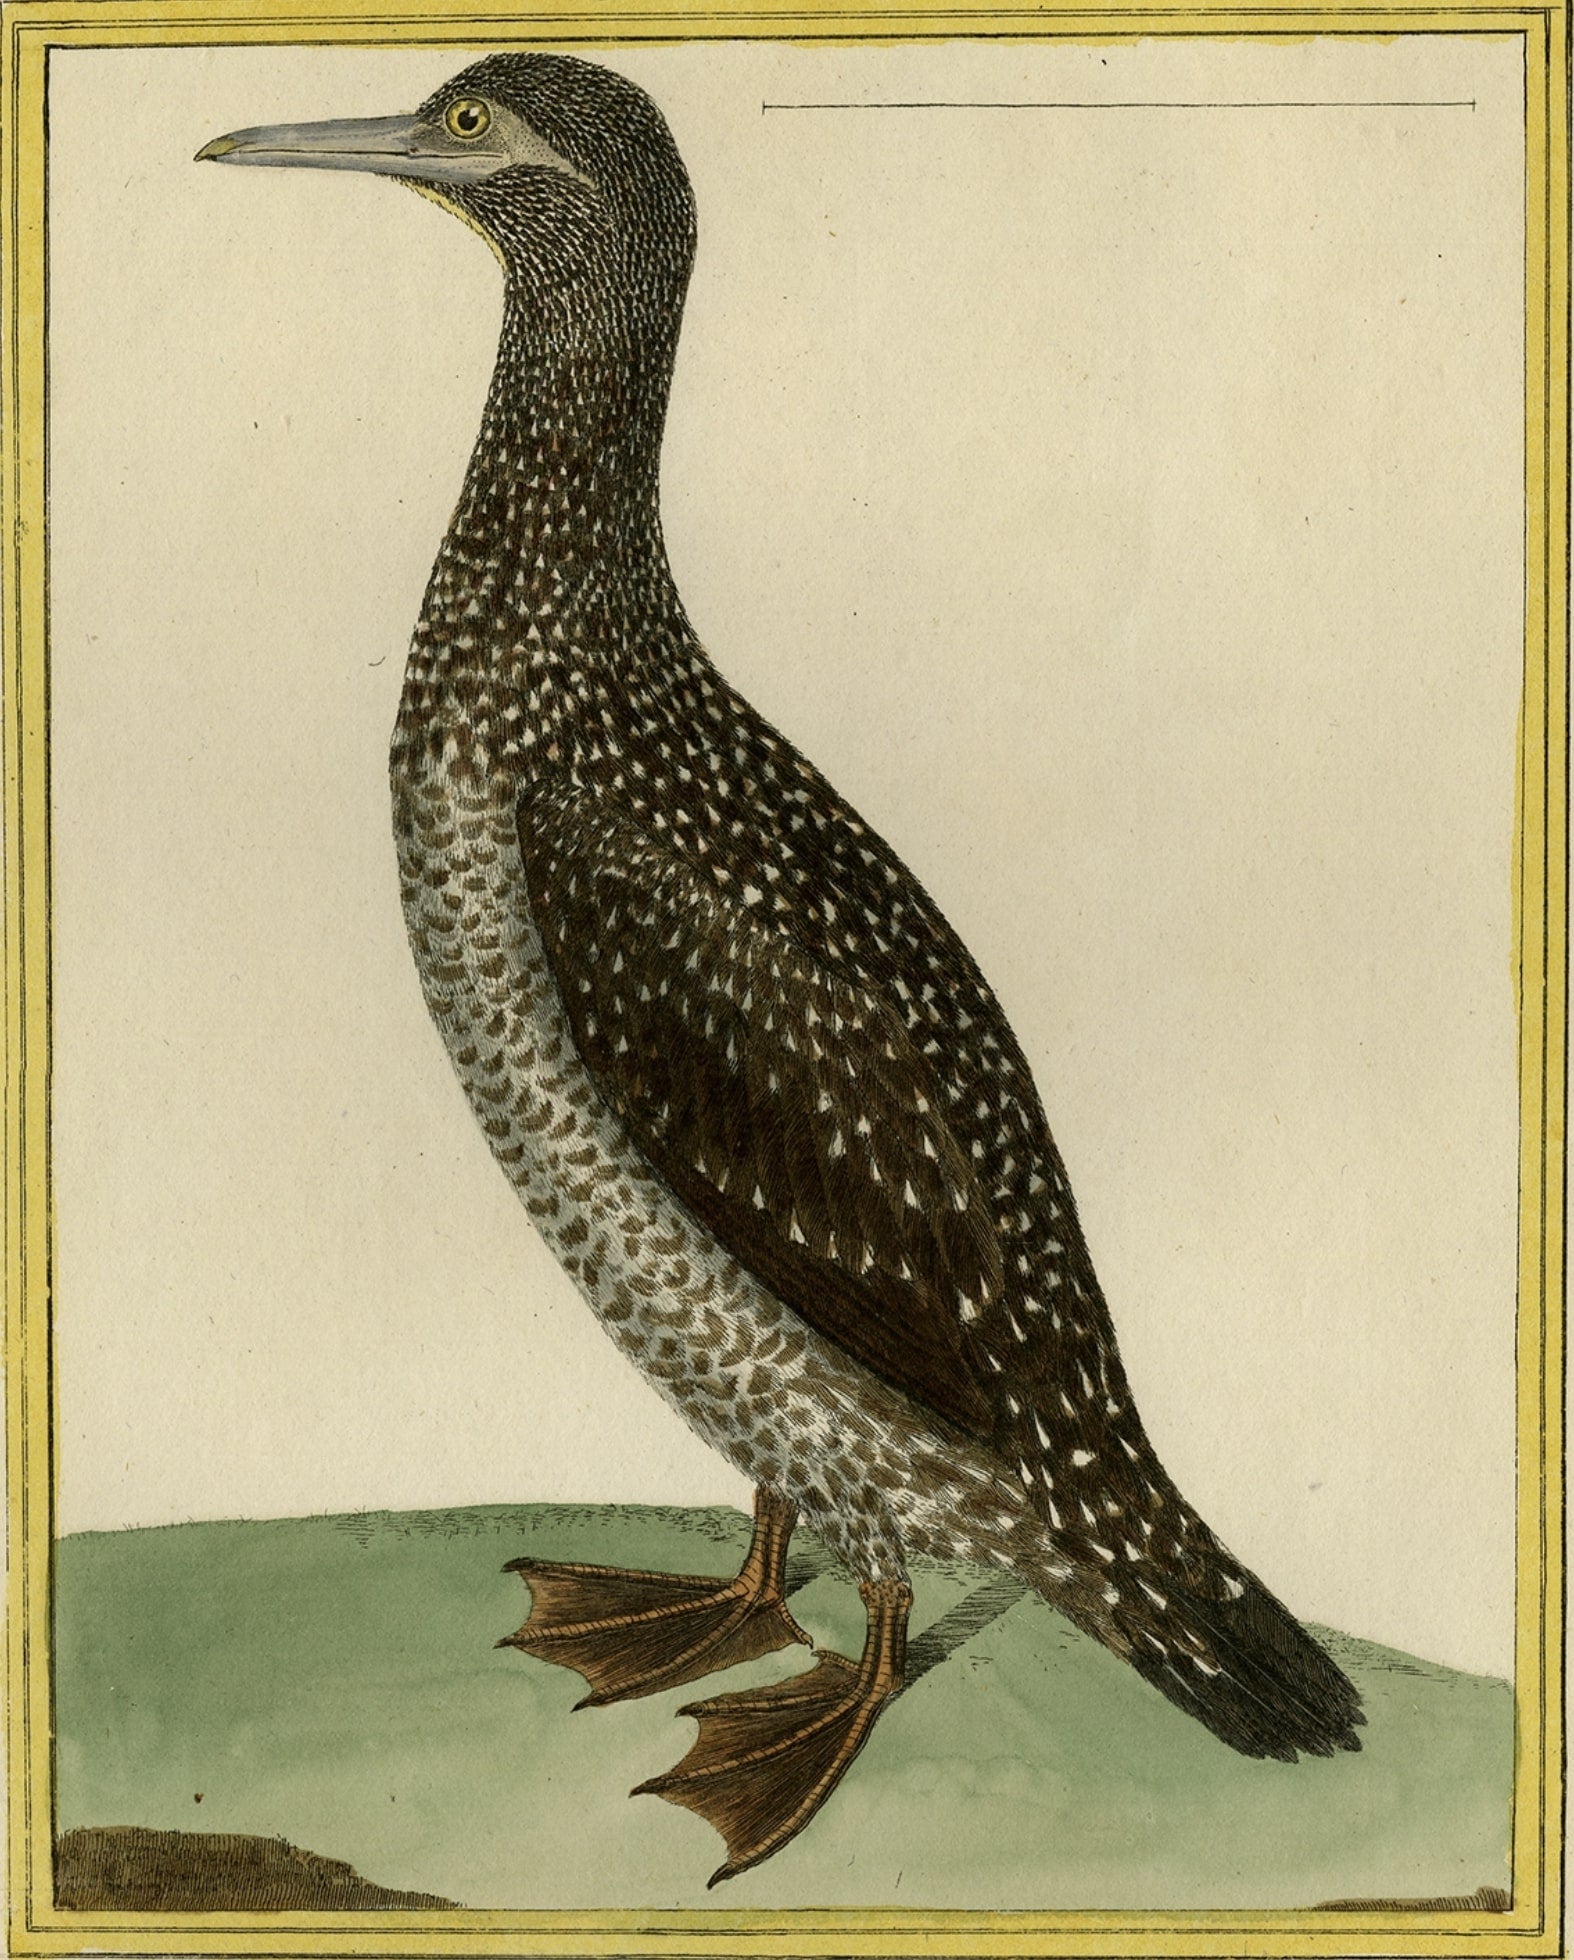 Antique print titled 'Fou tachete, de Cayenne.' 

This print shows a northern gannet (Juv). Originates from 'Histoire Naturelle des Oiseaux', by Comte de Buffon, published in Paris from 1770 to 1786. This is considered the most important 18th c.